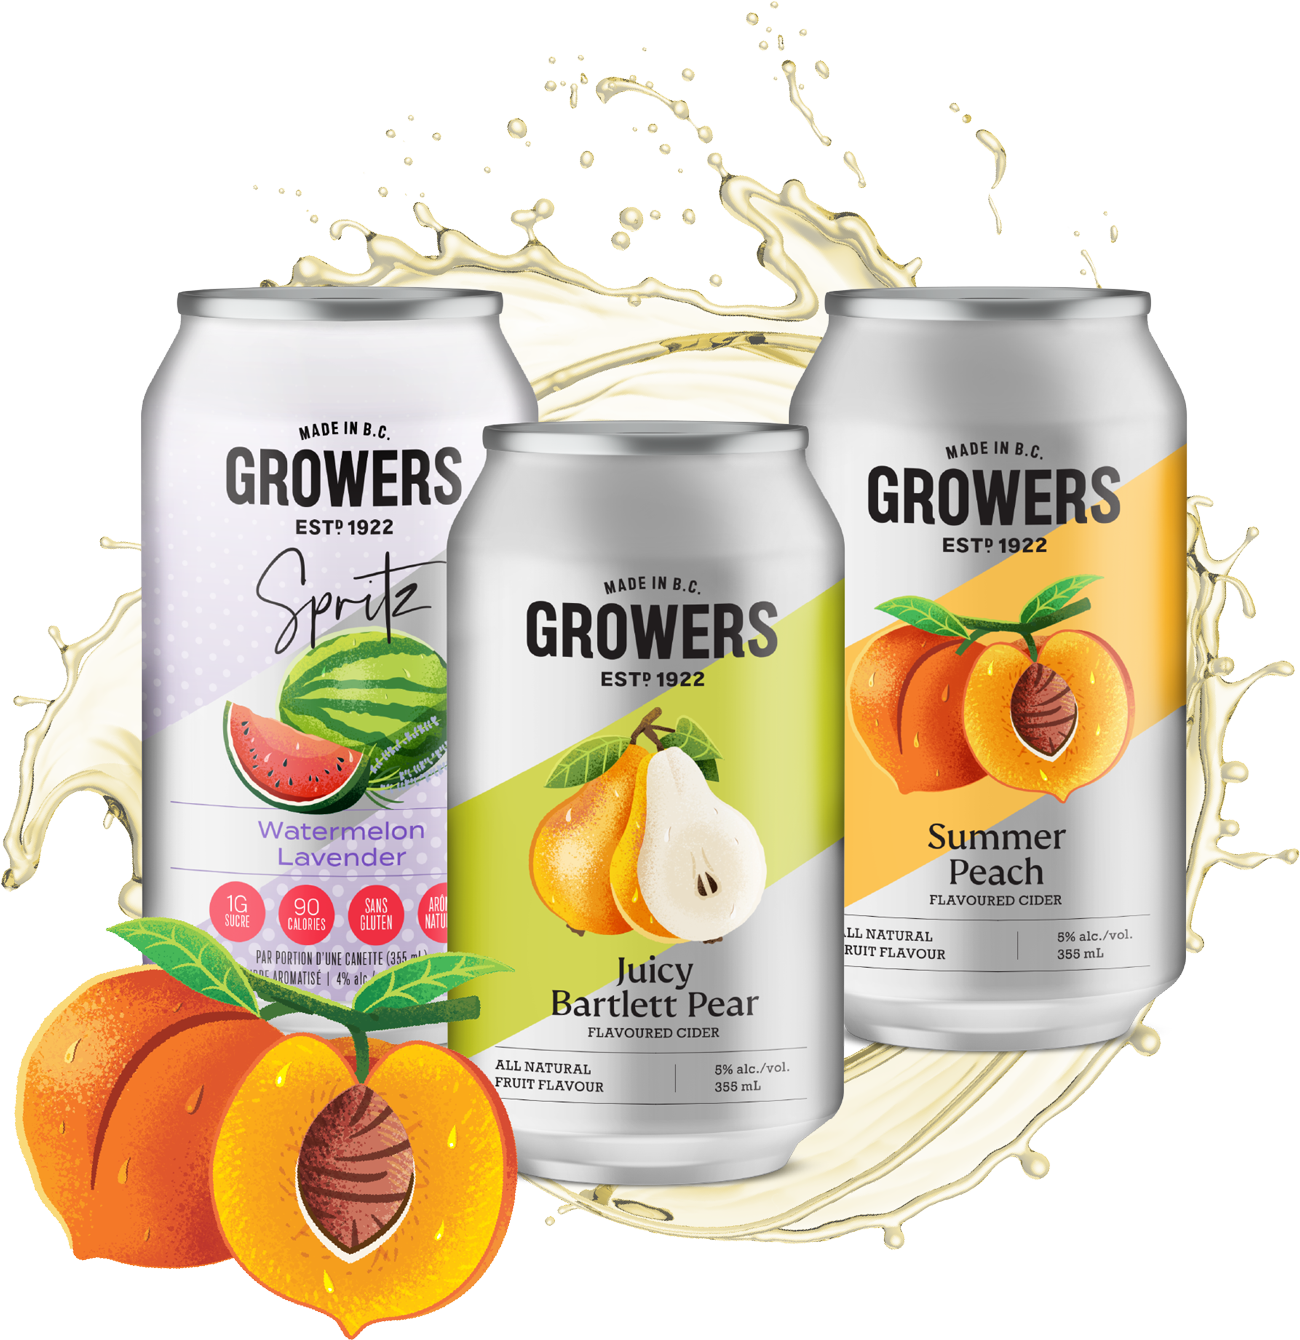 Three cans of Growers ciders